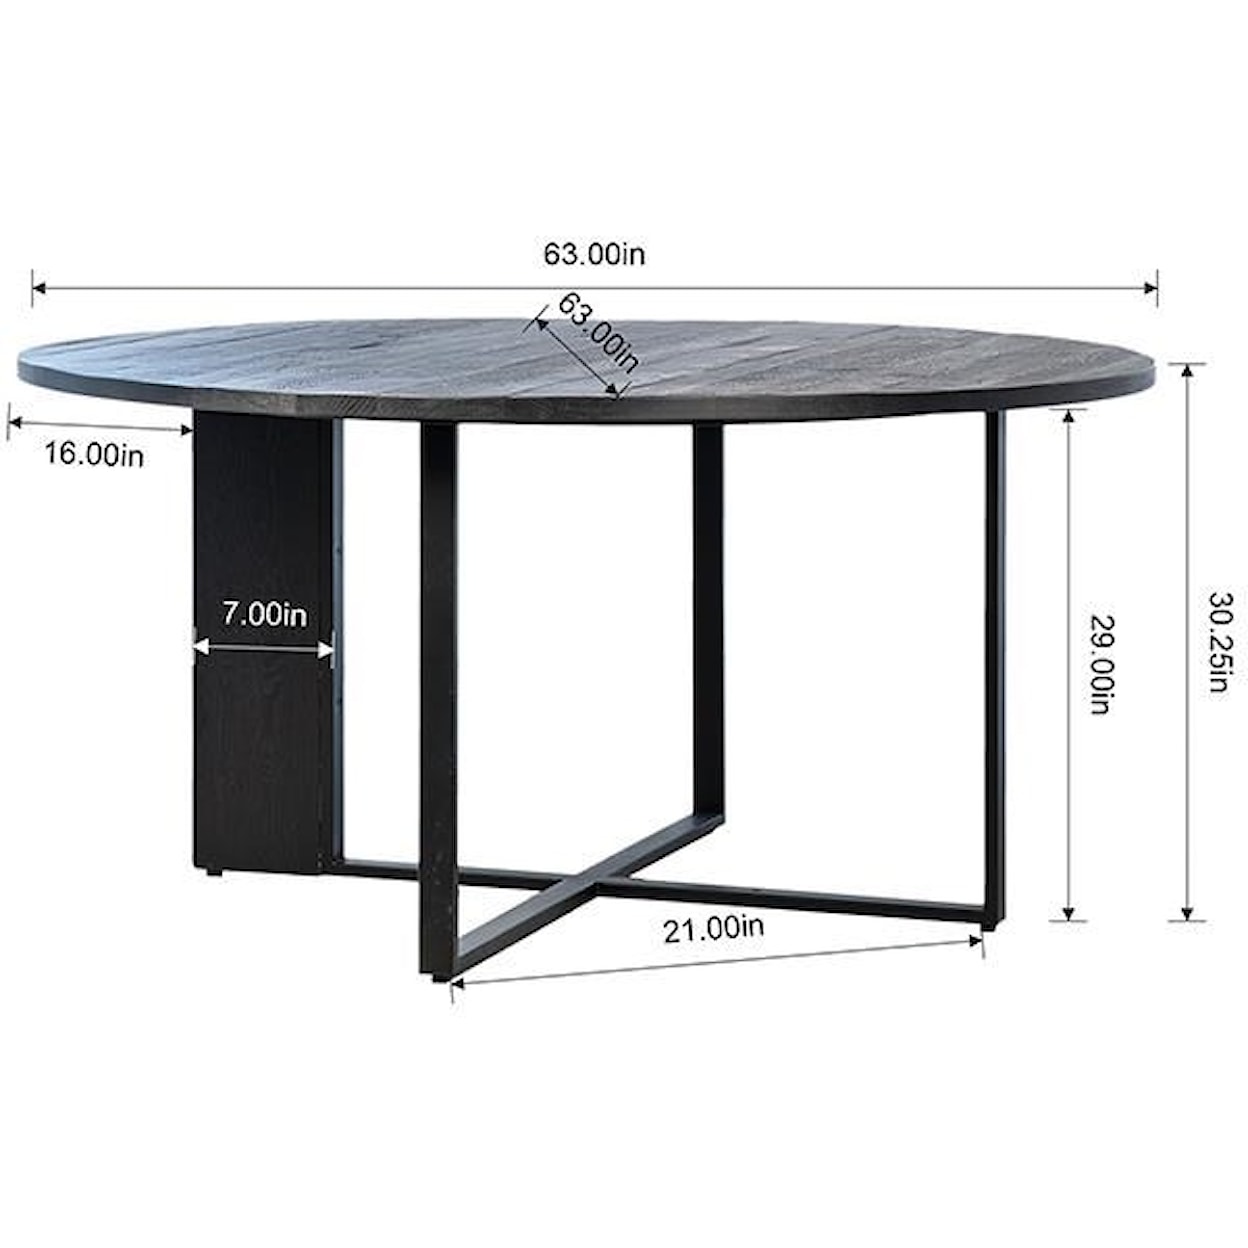 Dovetail Furniture Dining Tables Hizon Dining Table